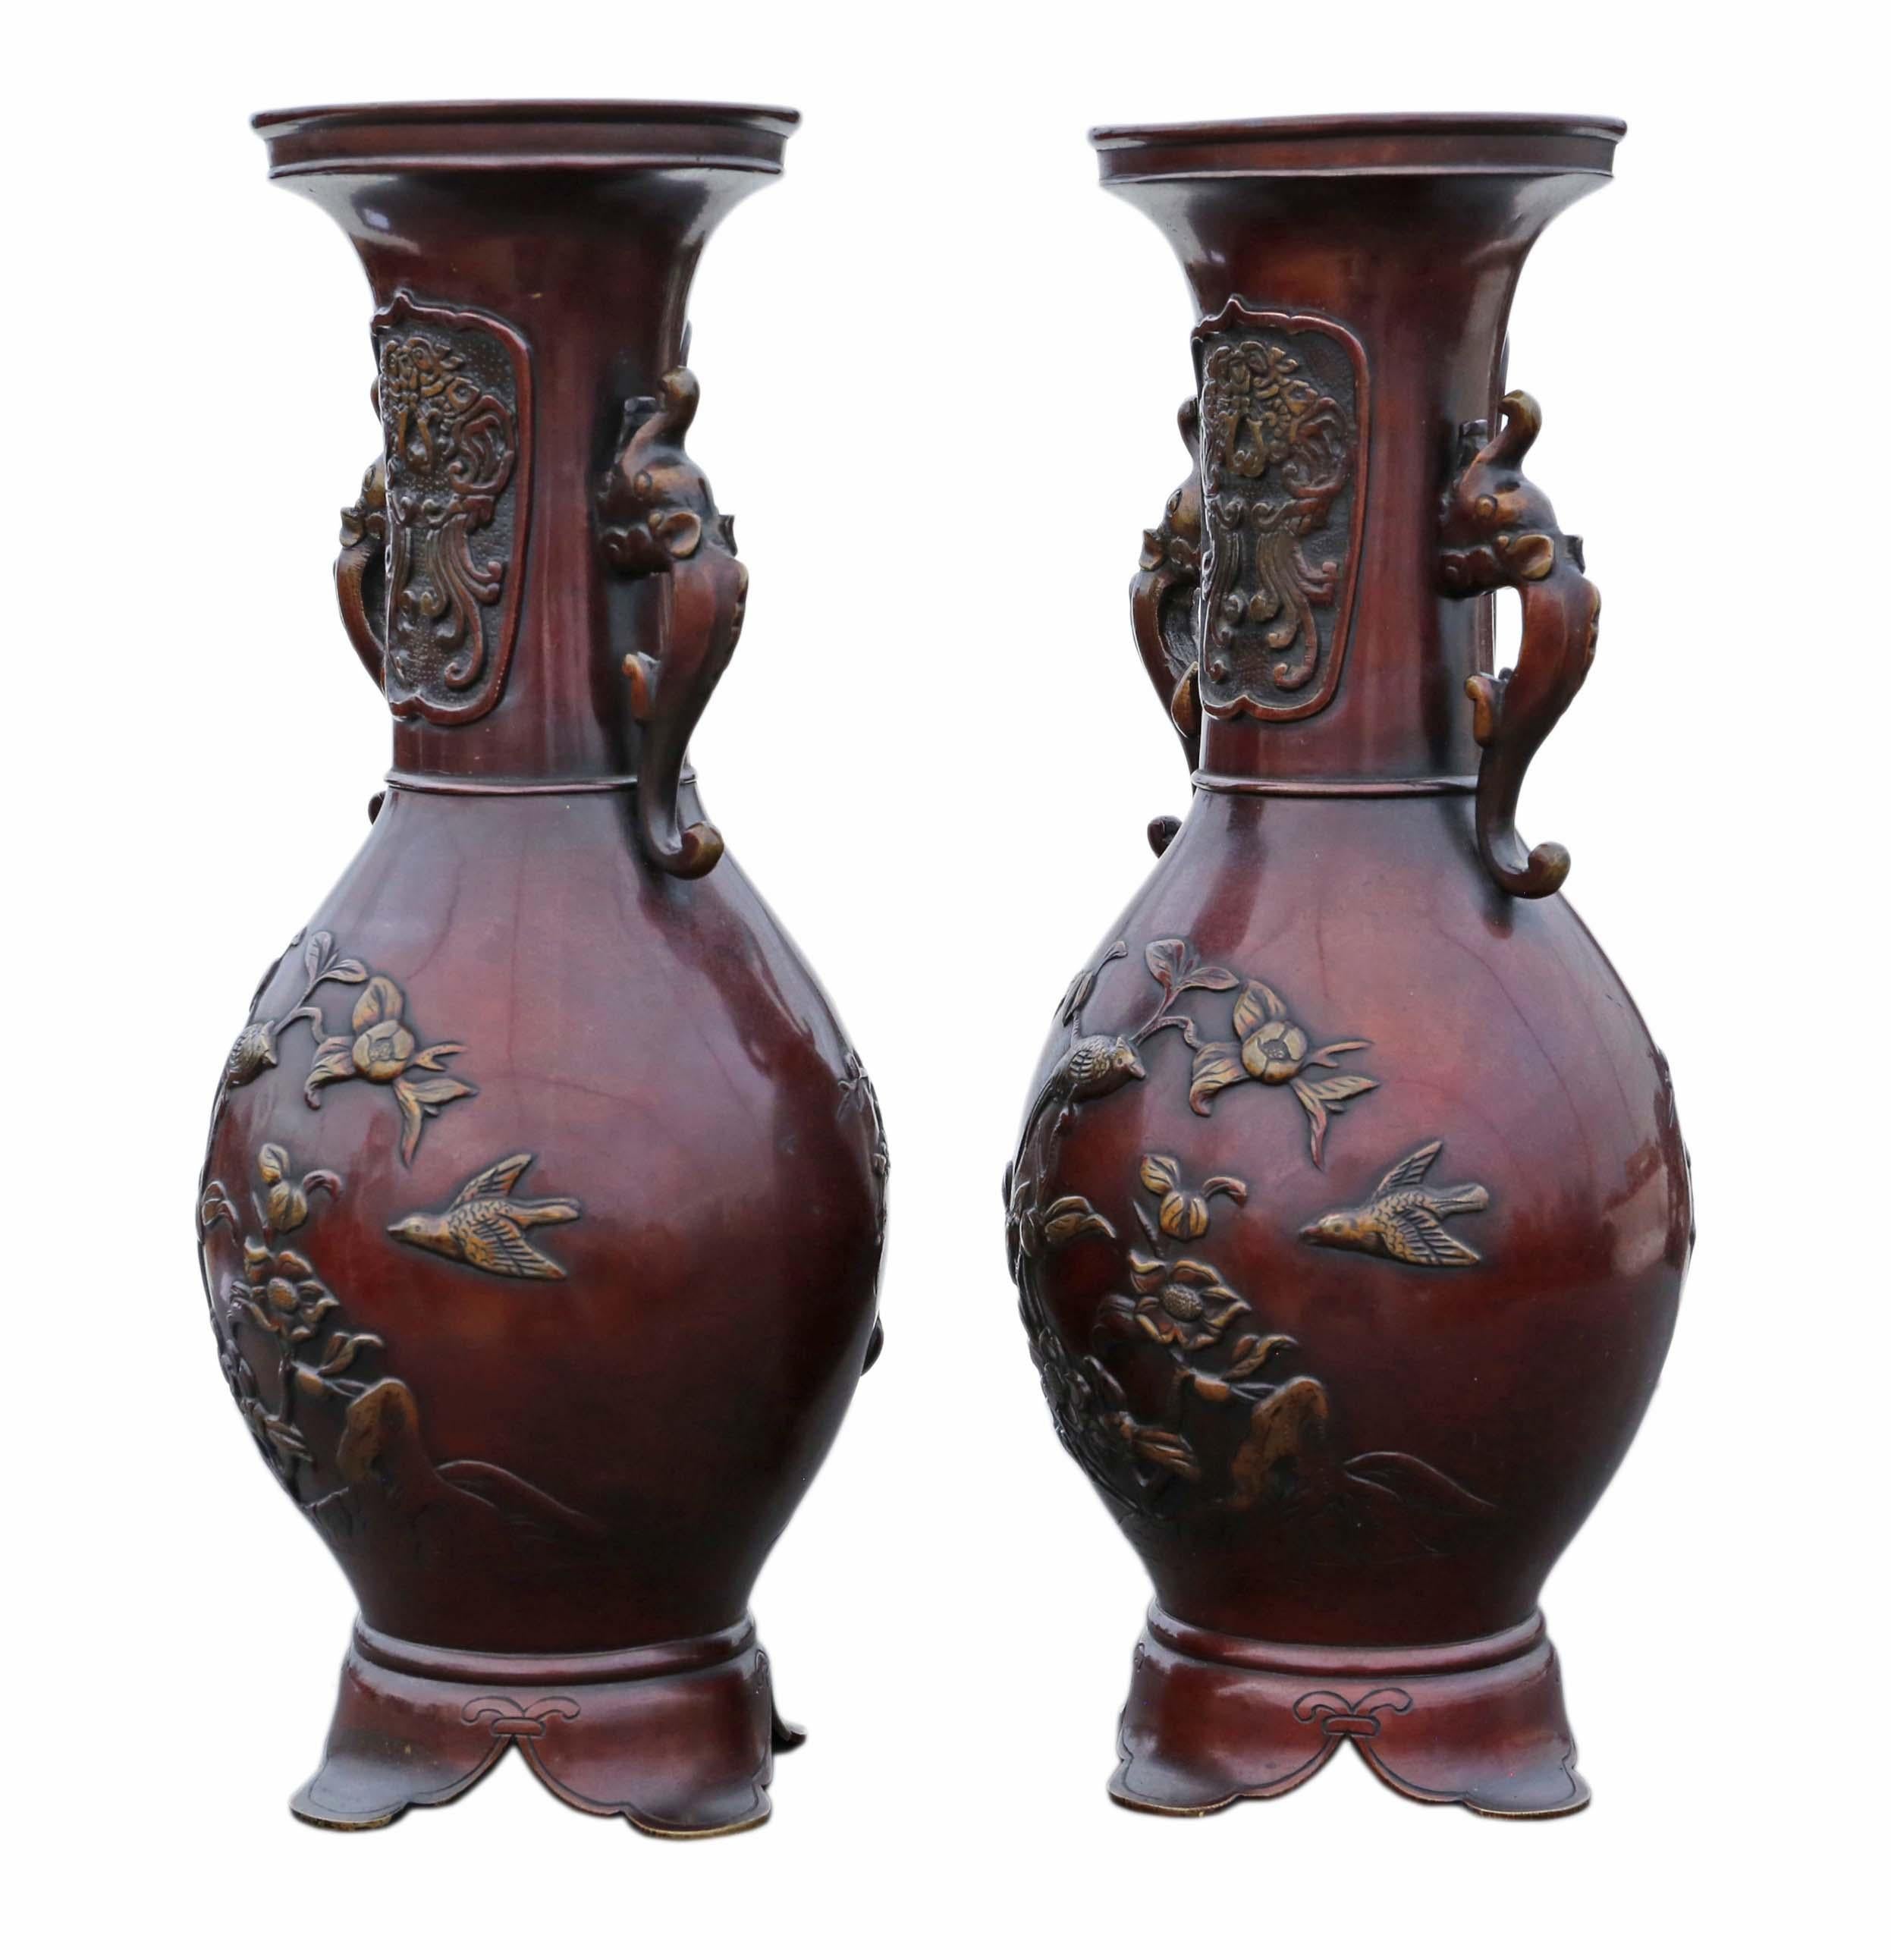 Antique very large pair of fine quality Japanese bronze vases C1910 Meiji Period. 

Would look amazing in the right location. Rare large size and design.

Overall maximum dimensions: 35cmH x 14cm diameter. Weigh 2.2Kg each.

In very good